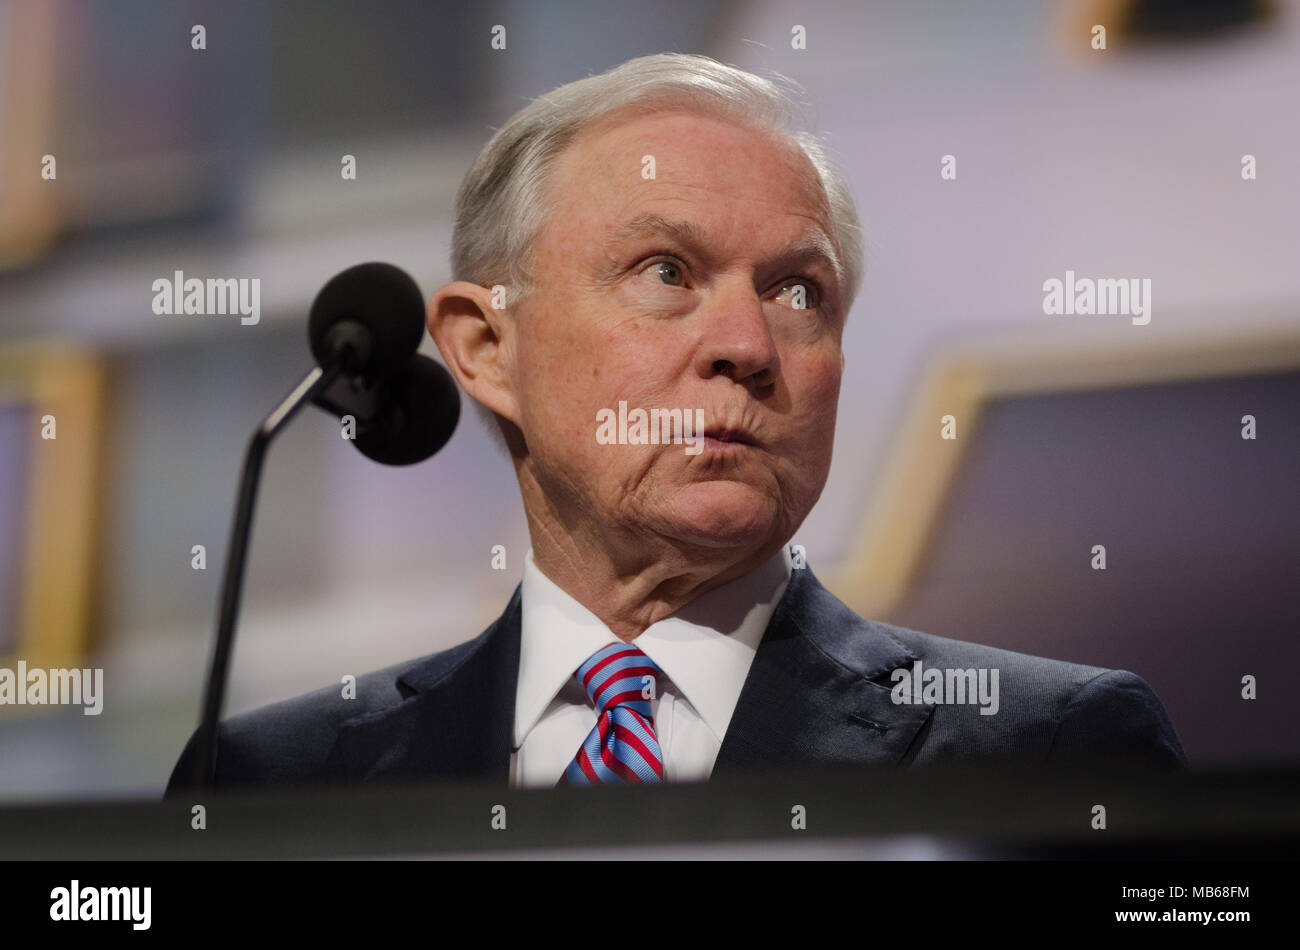 CLEVELAND - July 18, 2016: Senator Jeff Sessions stumps for presumptive Republican presidential nominee Donald Trump at the Republican National Convention. Stock Photo